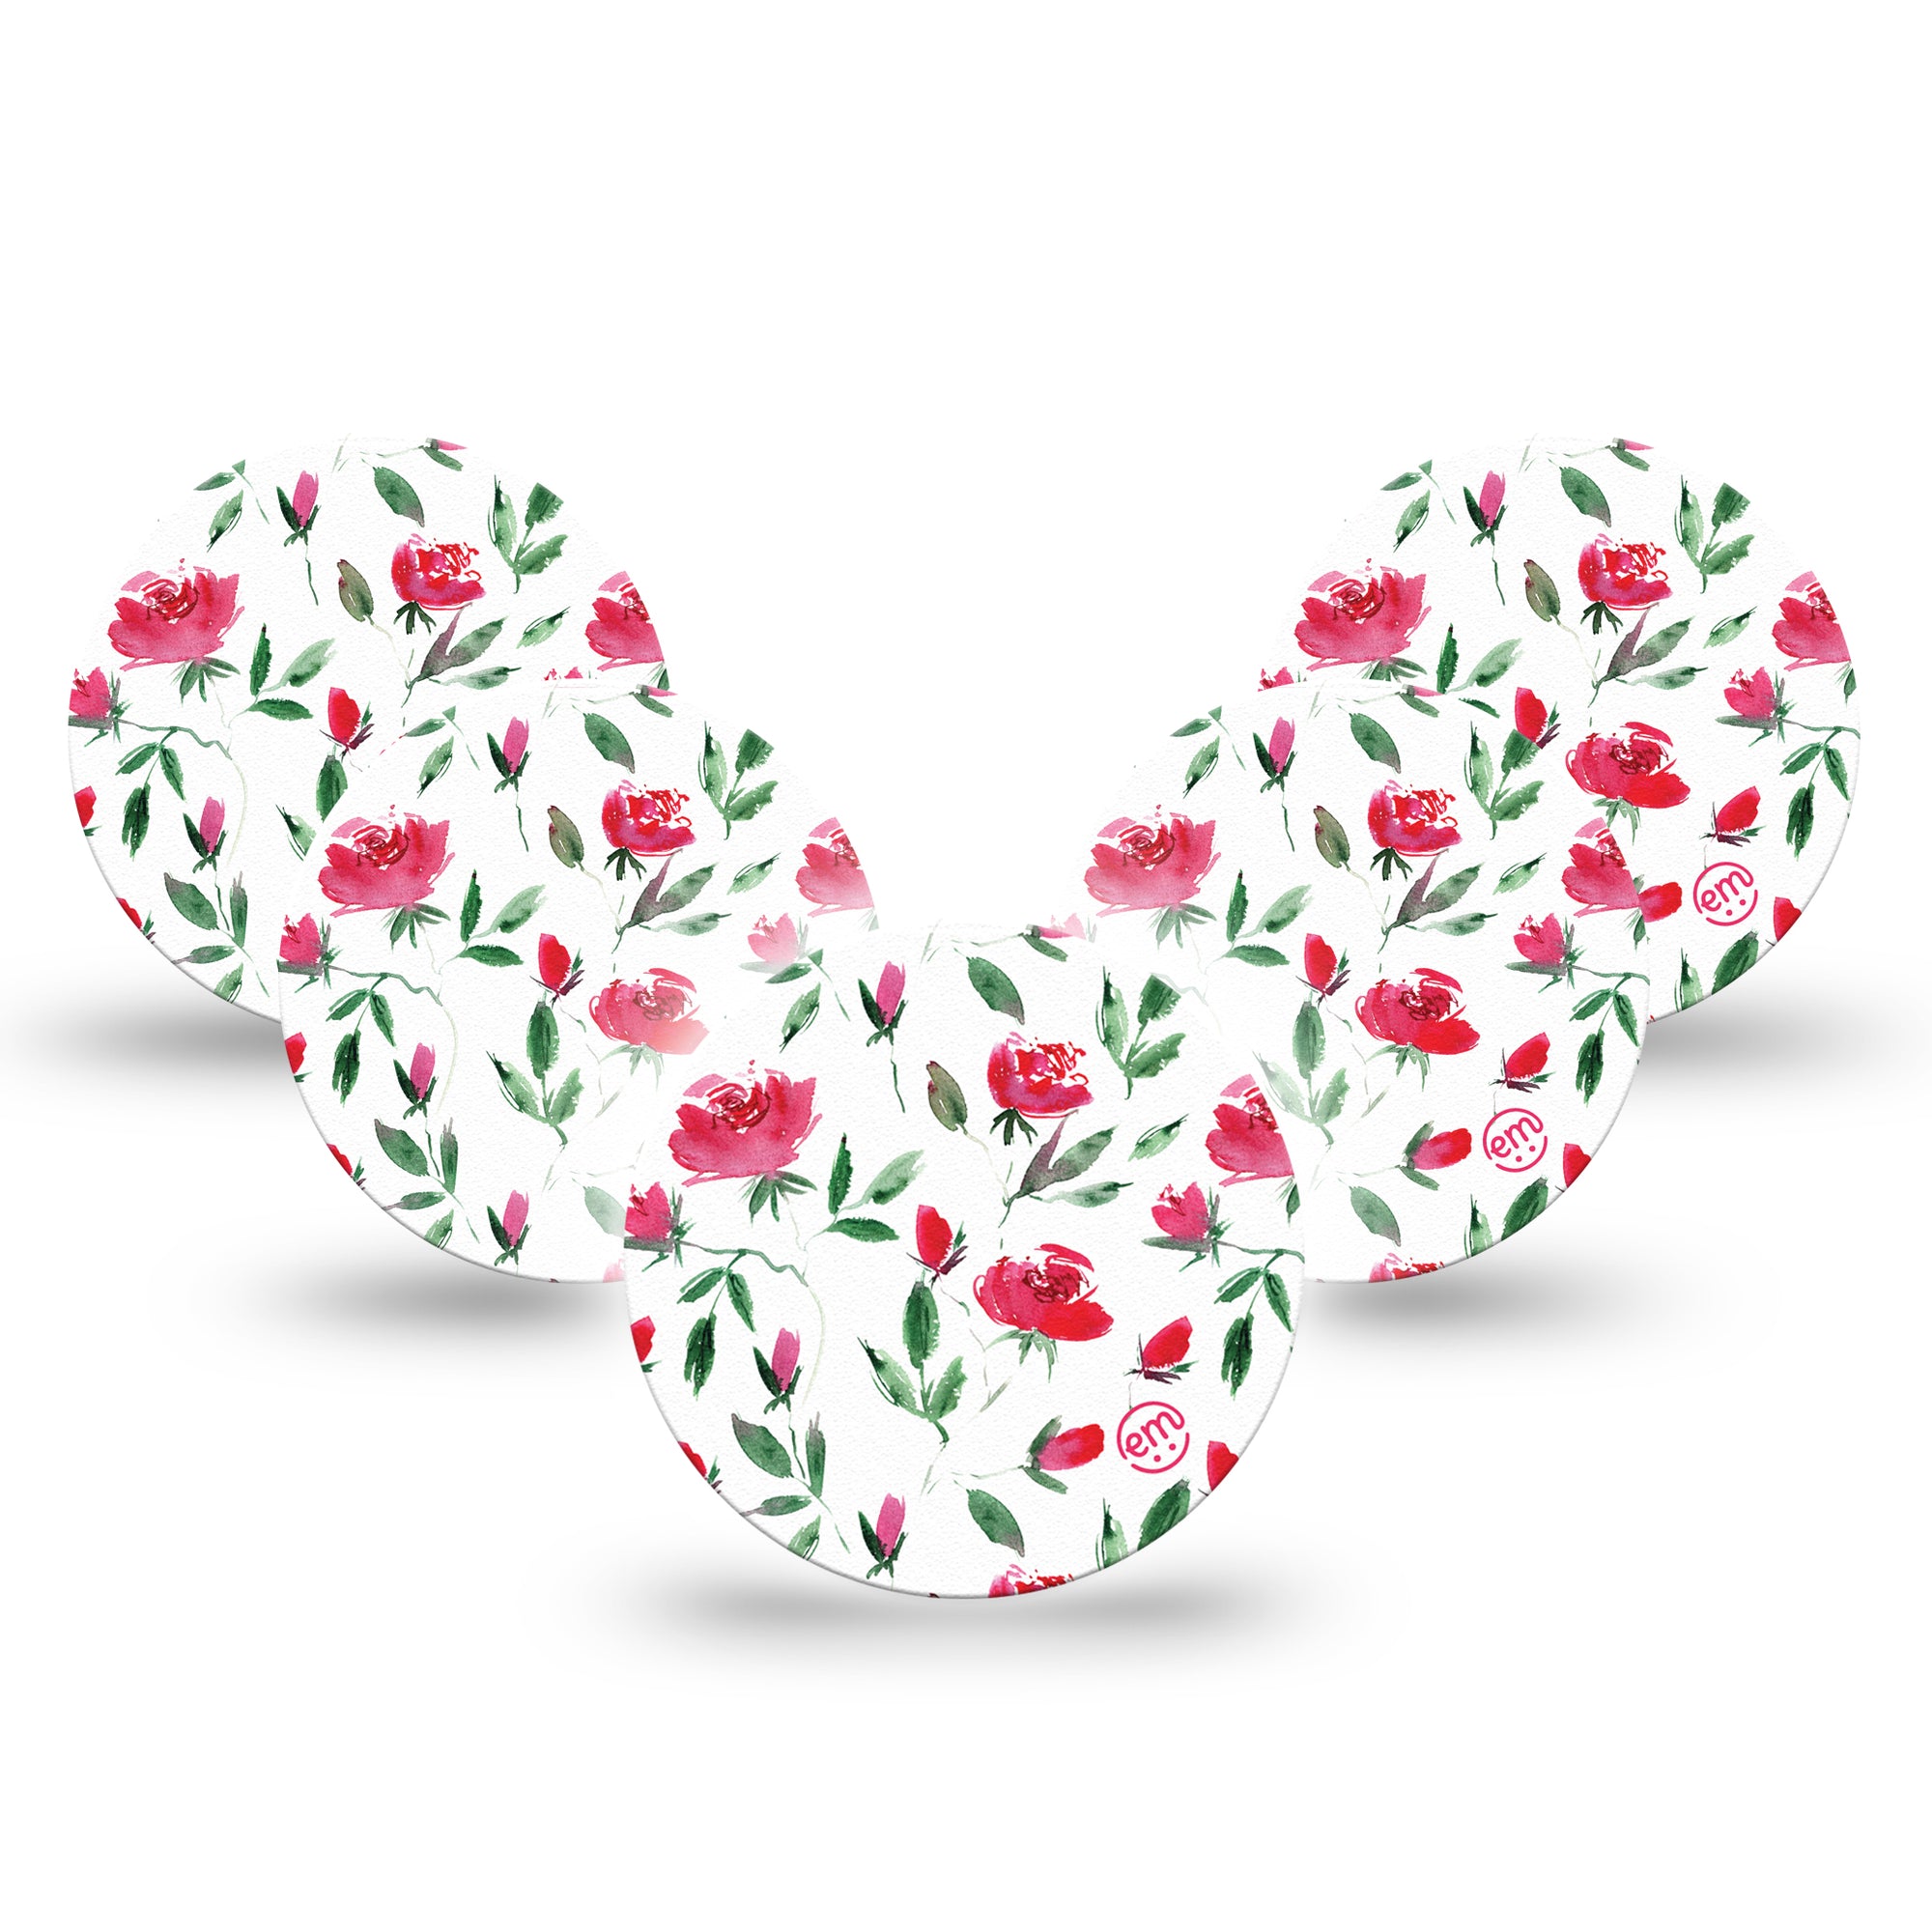 ExpressionMed Rose Garden Libre 3 Overpatch, 5-Pack, Pink Roses Inspired, CGM Adhesive Tape Design